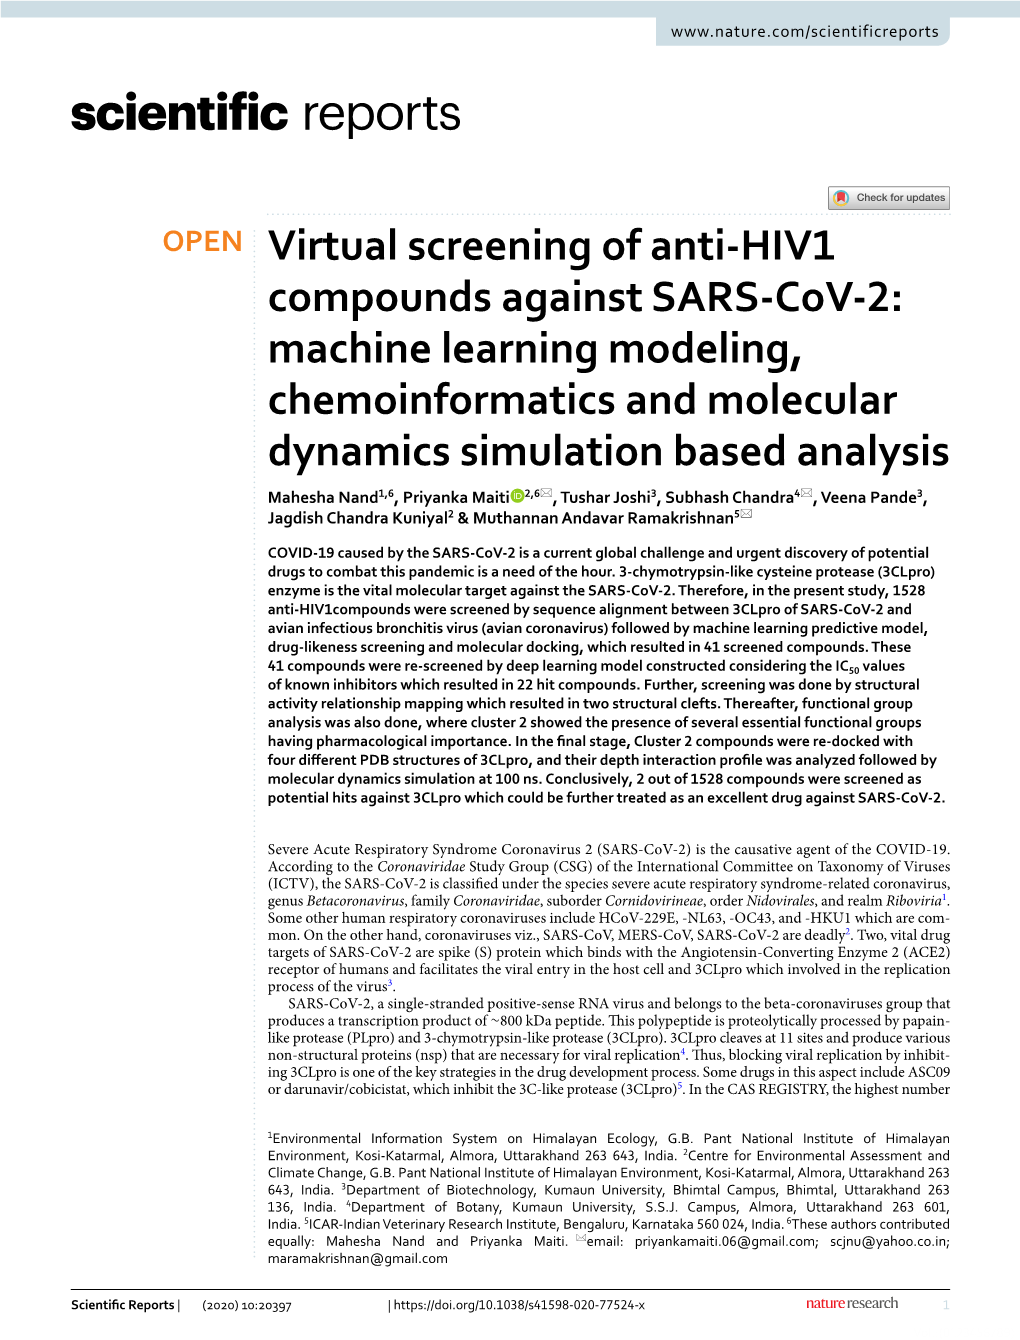 Virtual Screening of Anti-HIV1 Compounds Against SARS-Cov-2